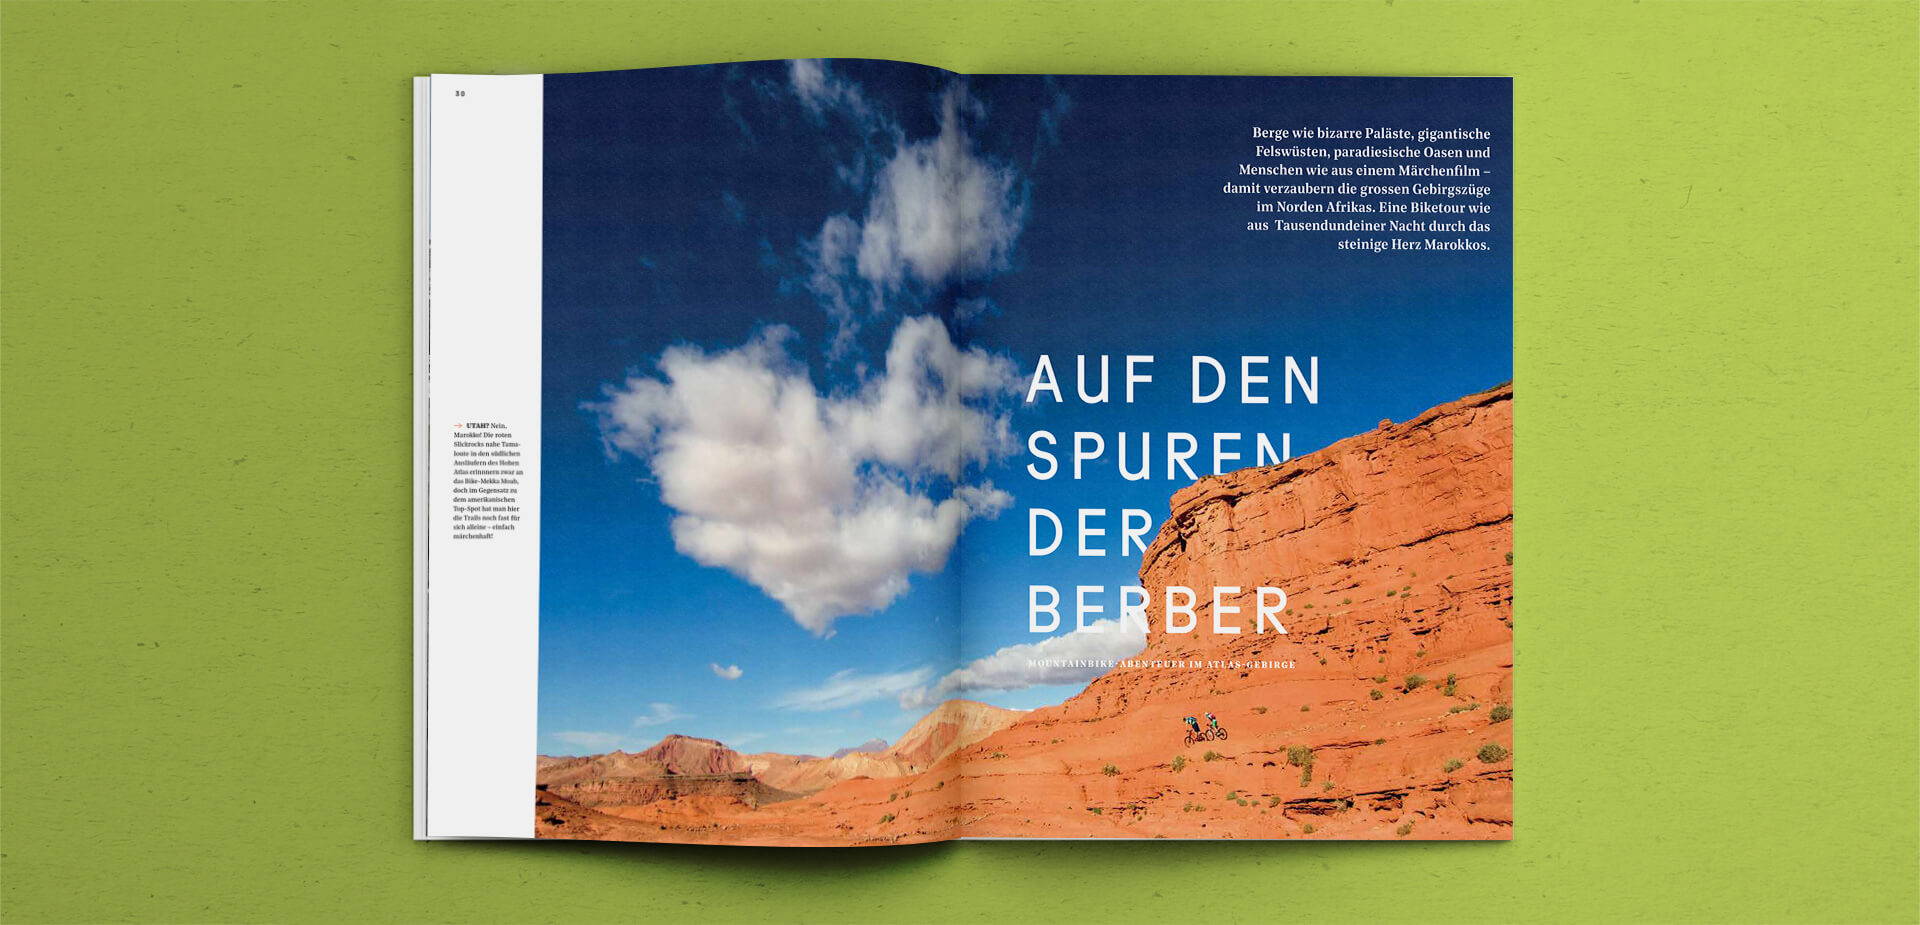 Fullsize photography spread of a story in the Outdoor Guide Magazine